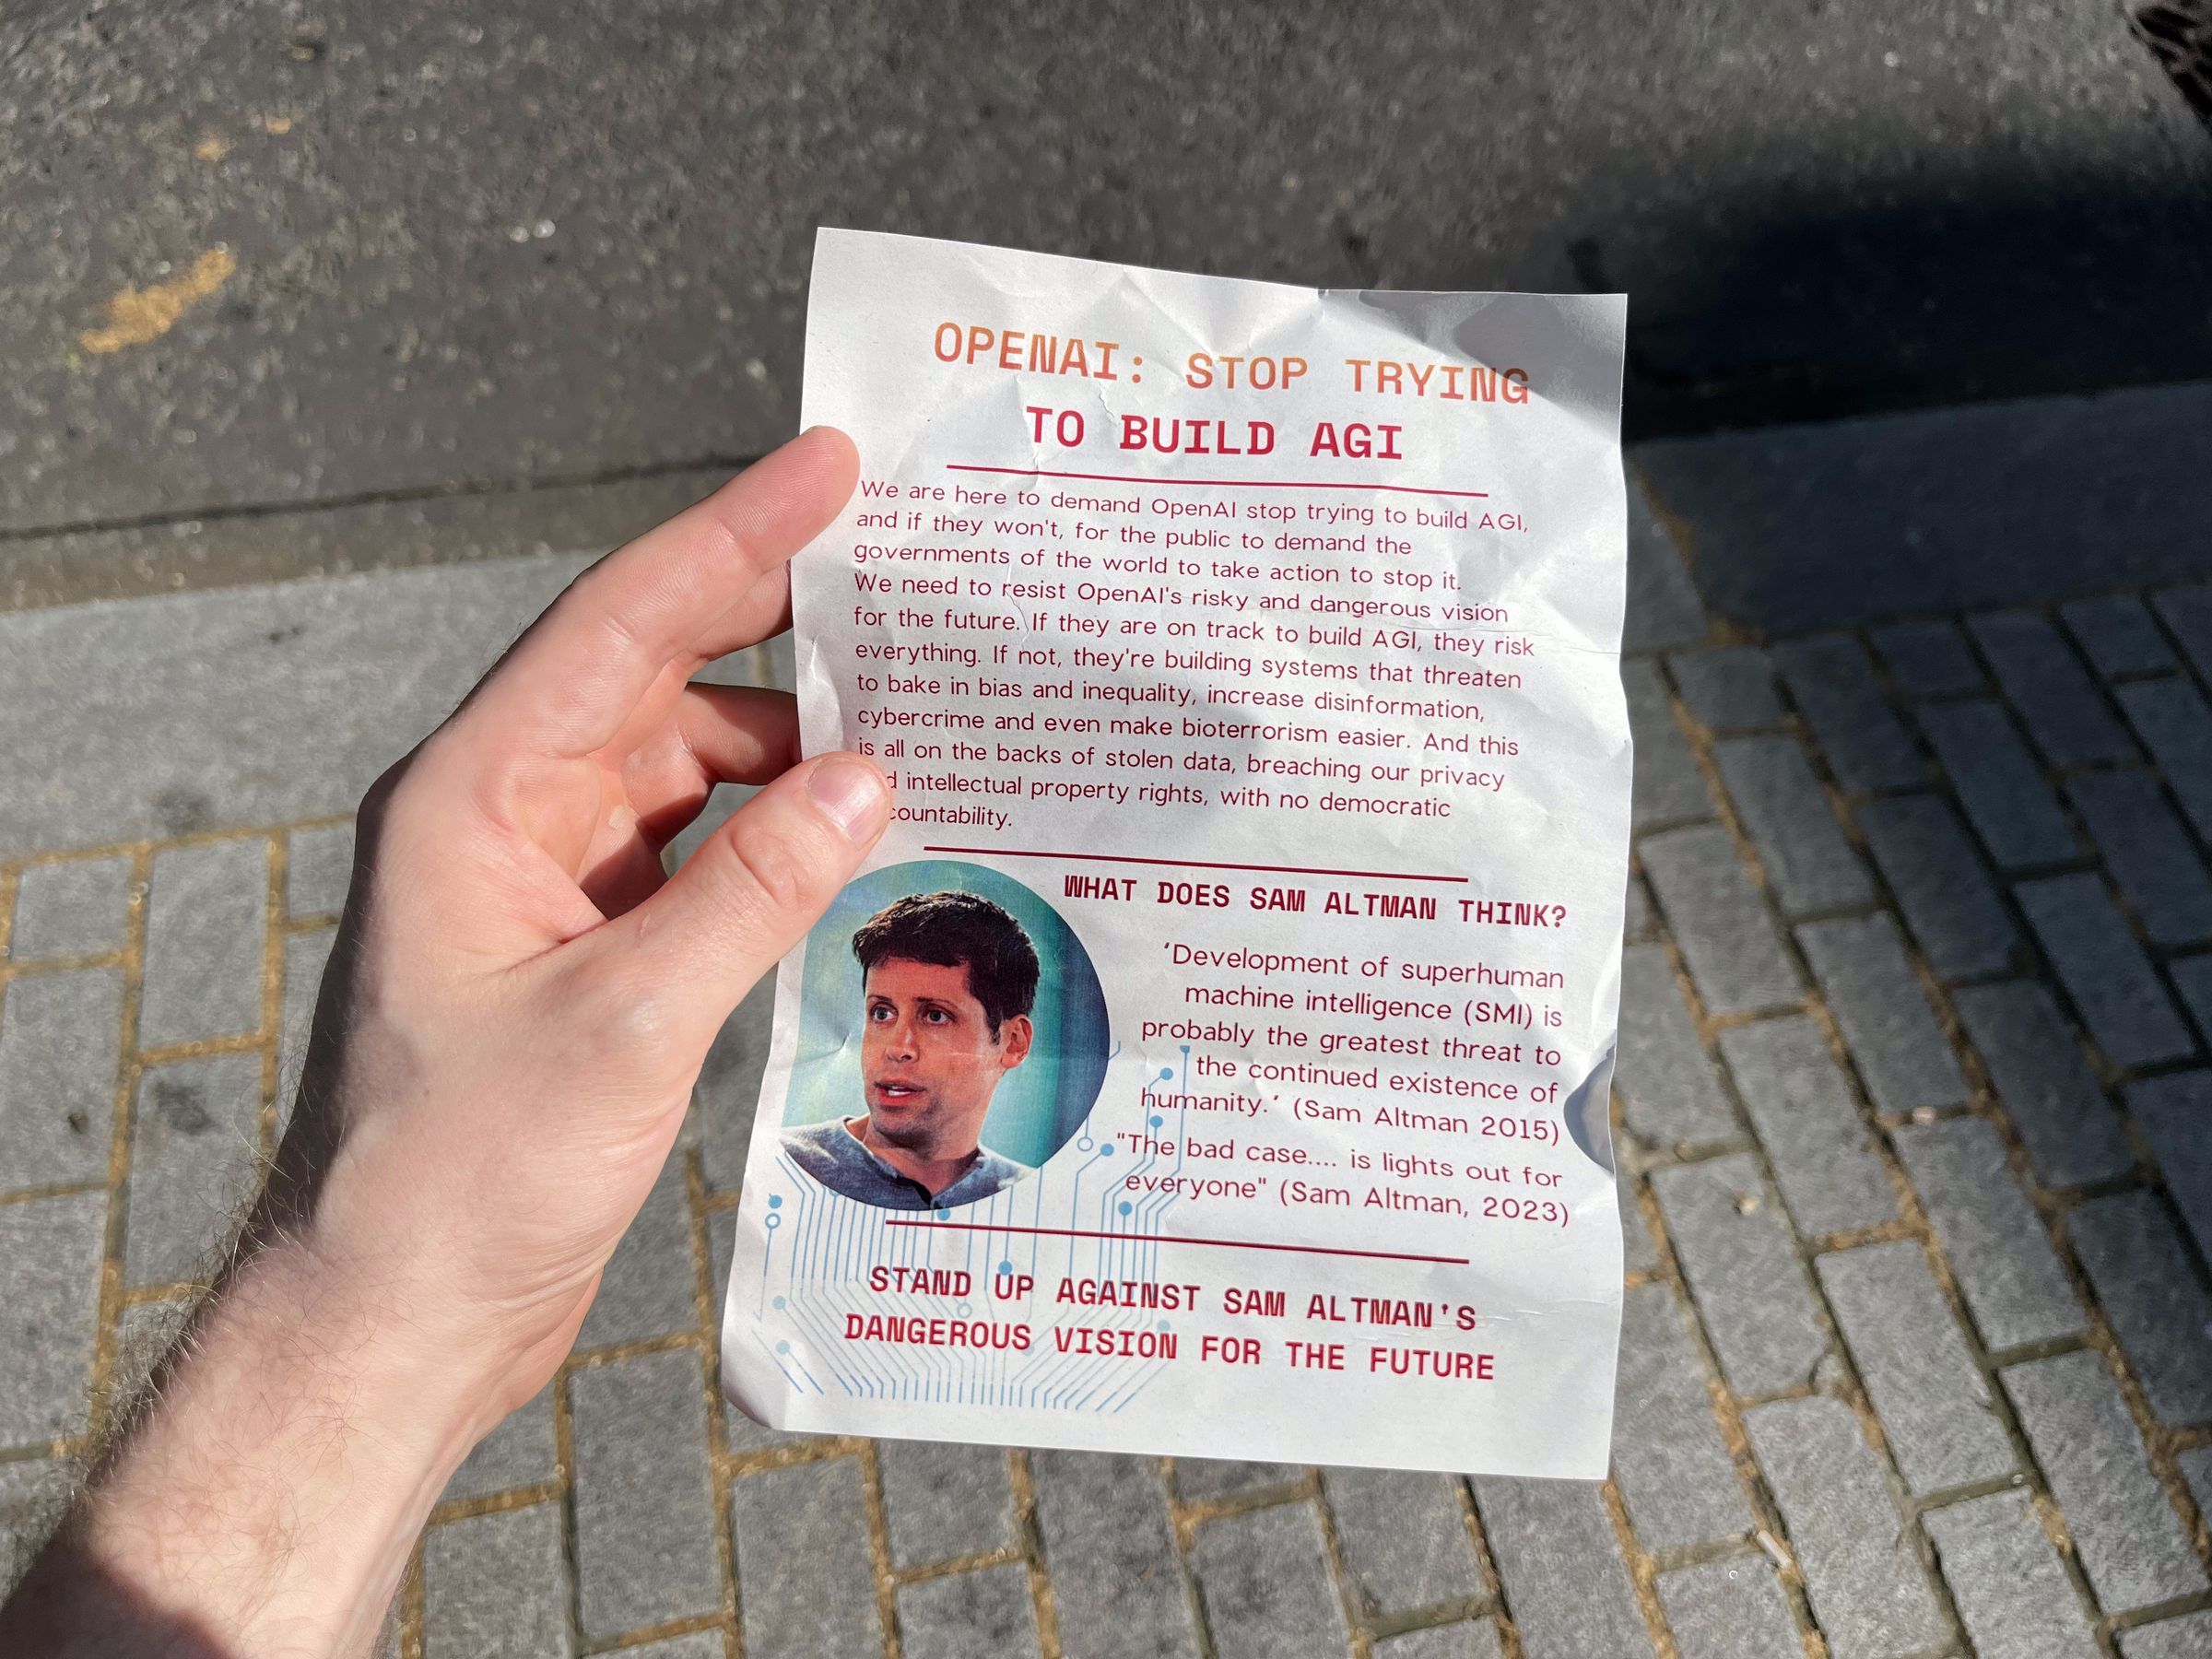 A photograph of a hand holding a leaflet with the title “OpenAI: stop trying to build AGI.” 